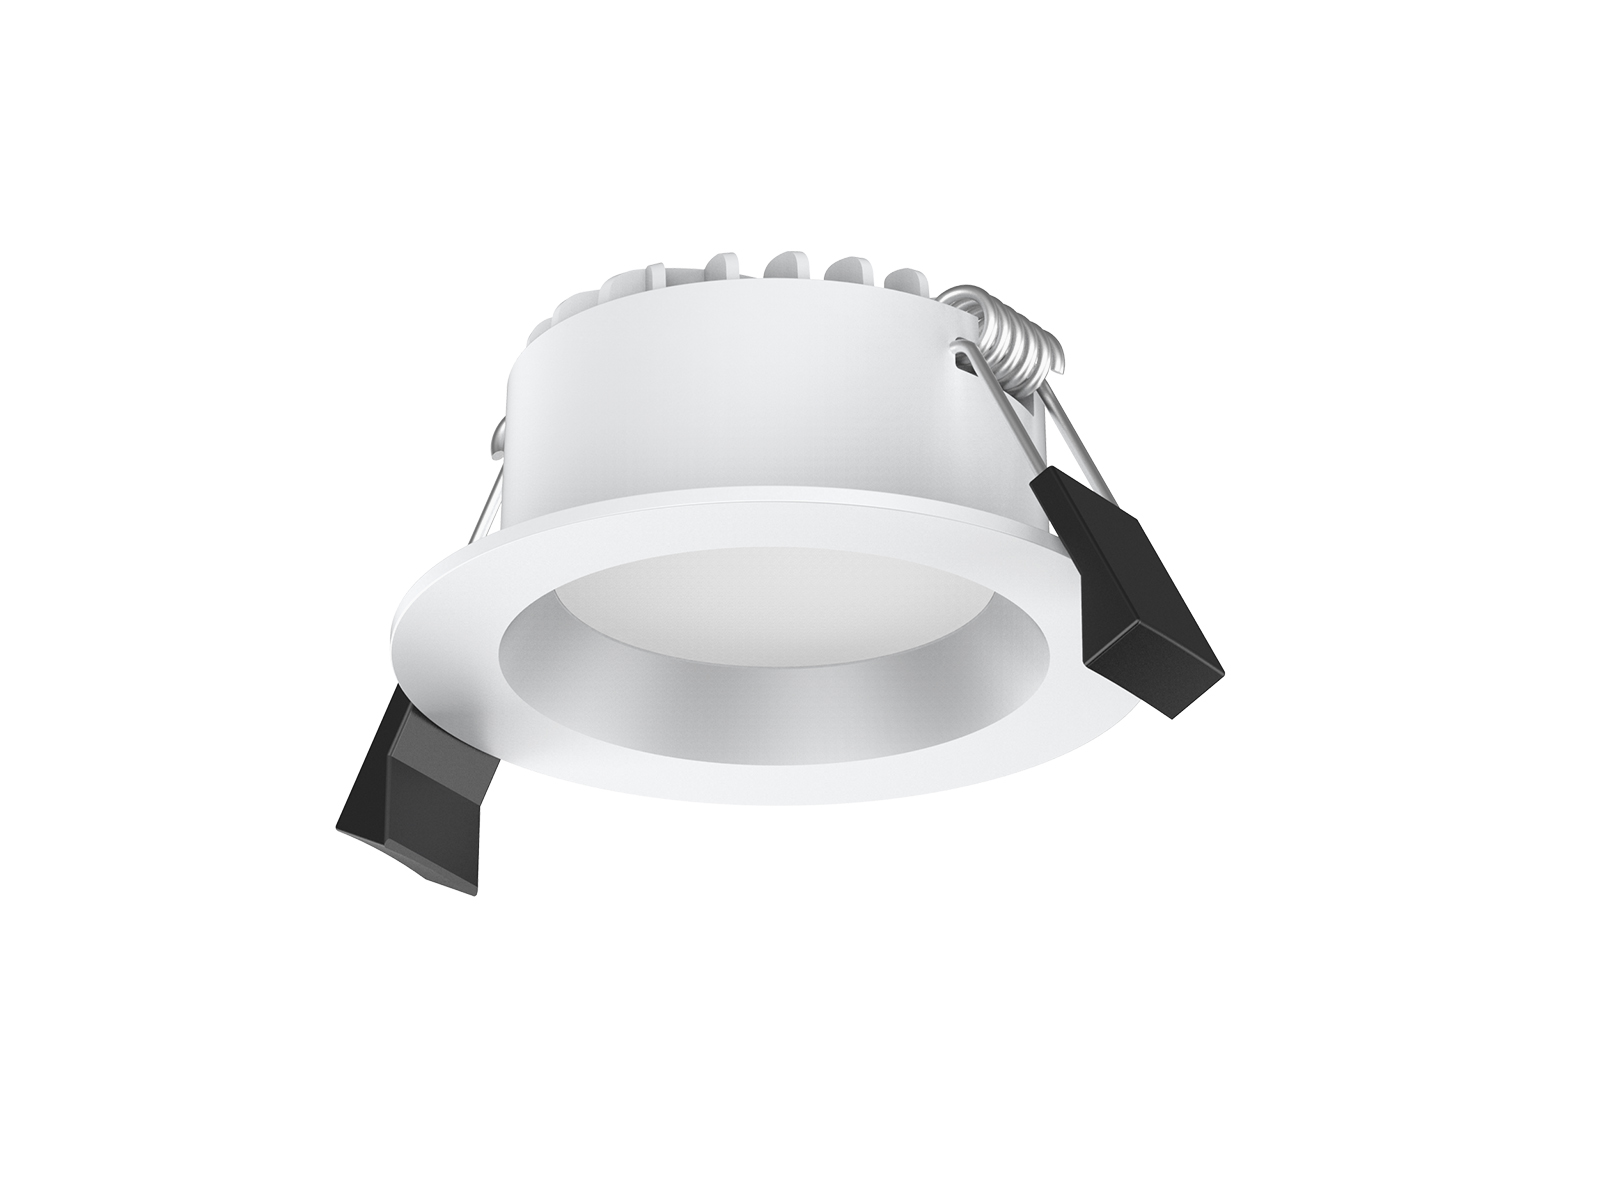 2.5 inch Dimmable Recessed downlight fixture